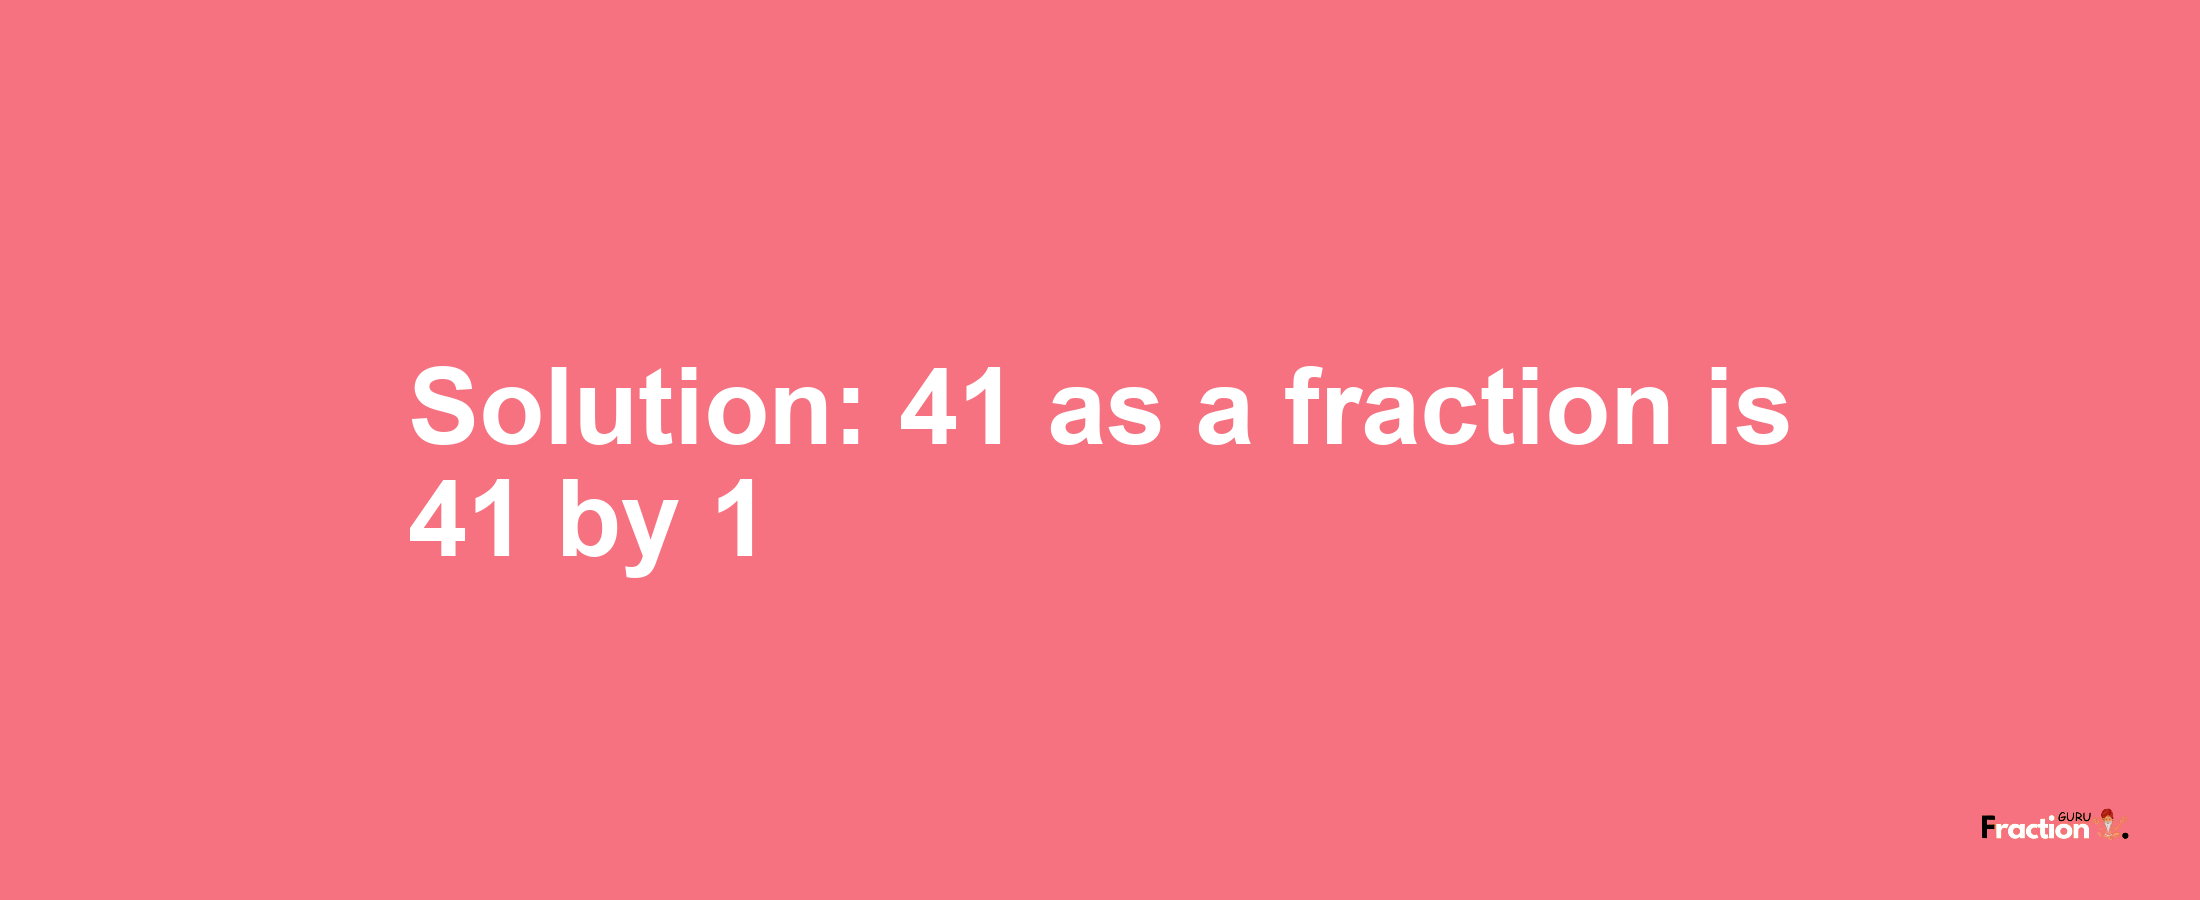 Solution:41 as a fraction is 41/1